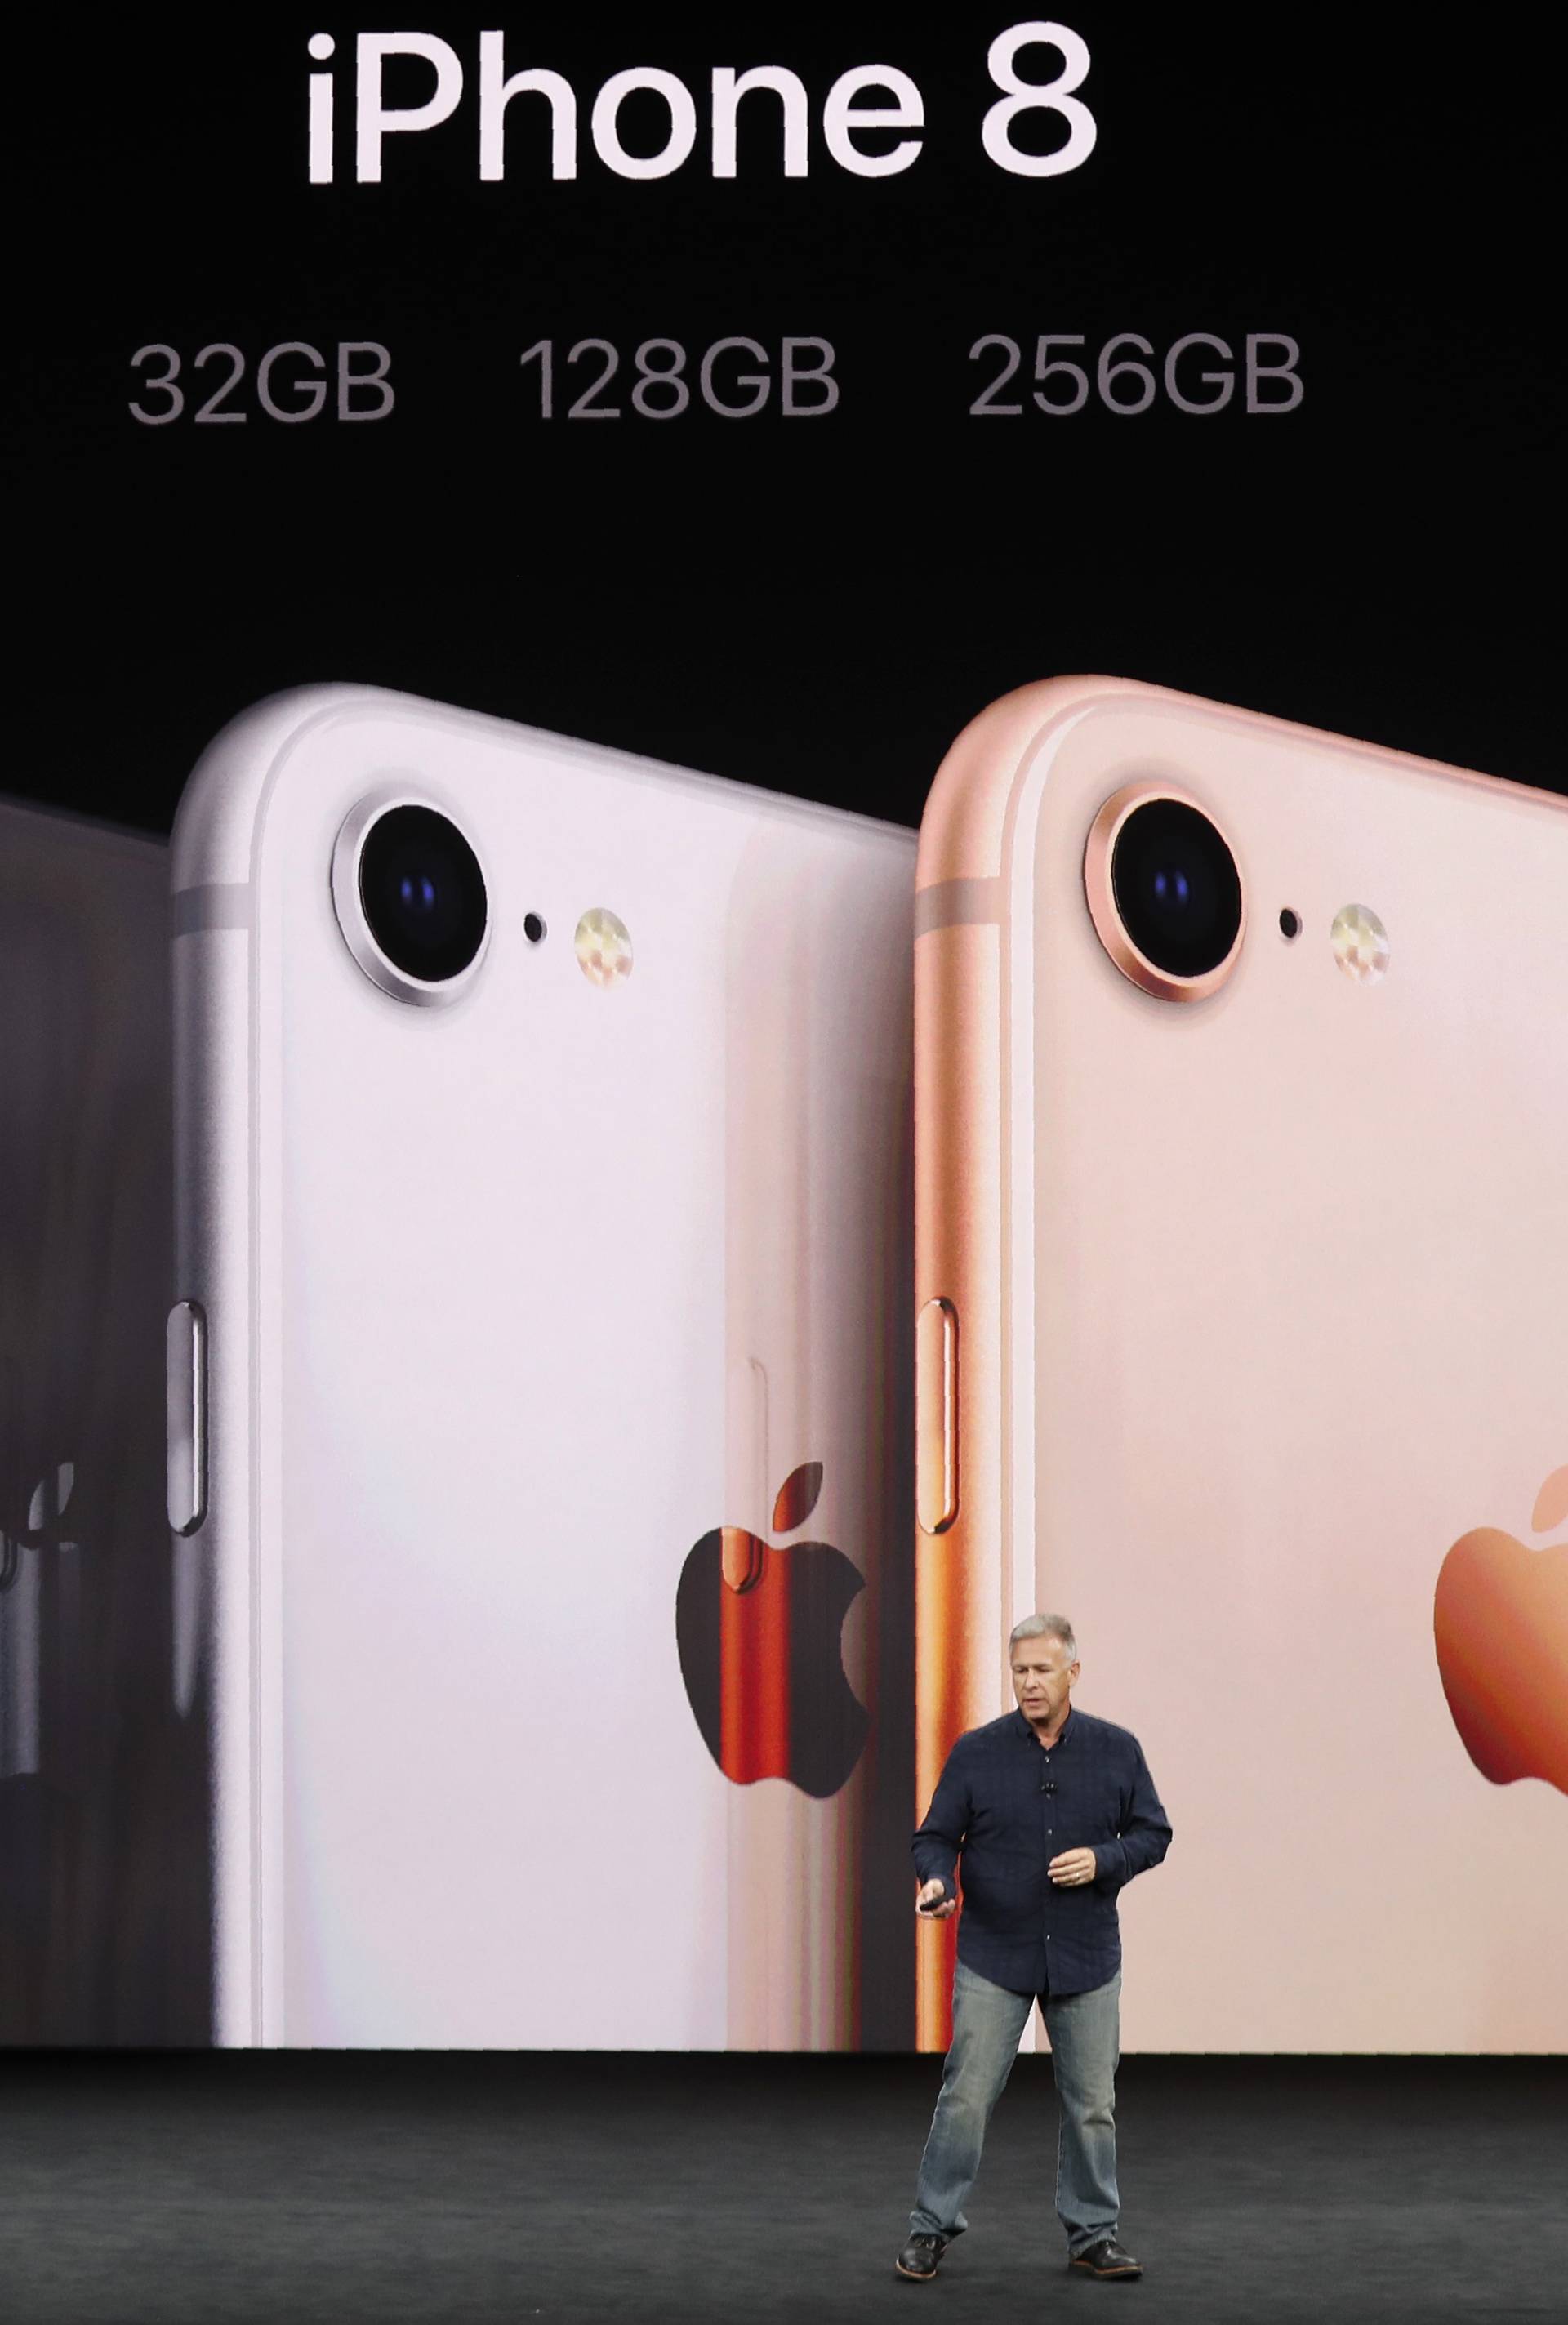 Apple's Schiller introduces the iPhone 8 during a launch event in Cupertino